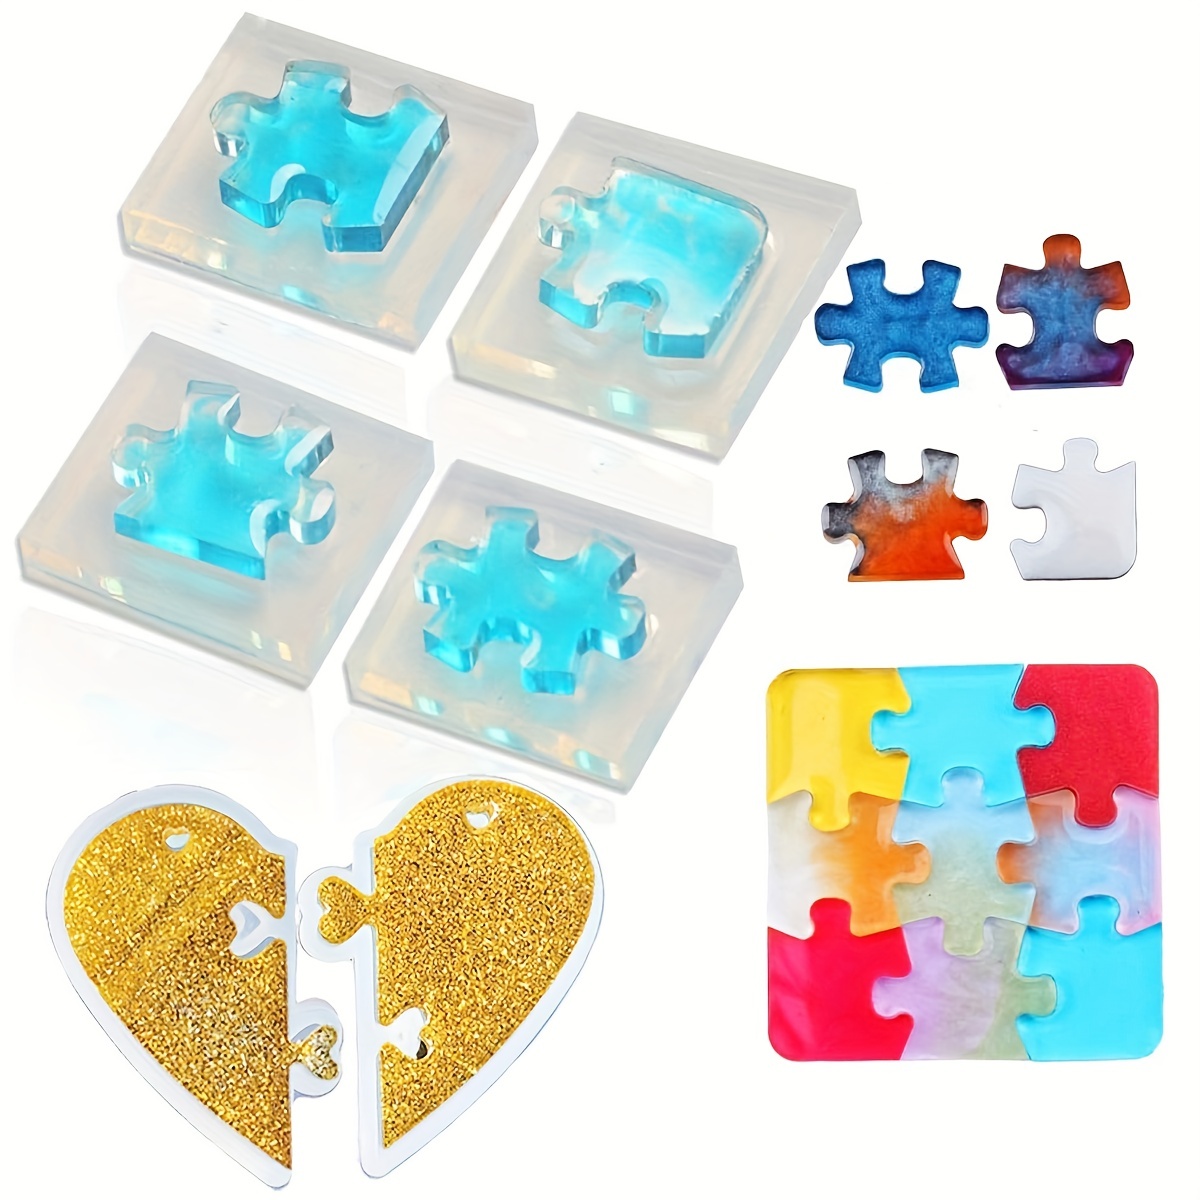 Mahjong Silicone Mold 3D Mahjong Christmas Candle Molds Silicone Shapes For  Candle Making DIY Art Crafts Kit Home Supplies